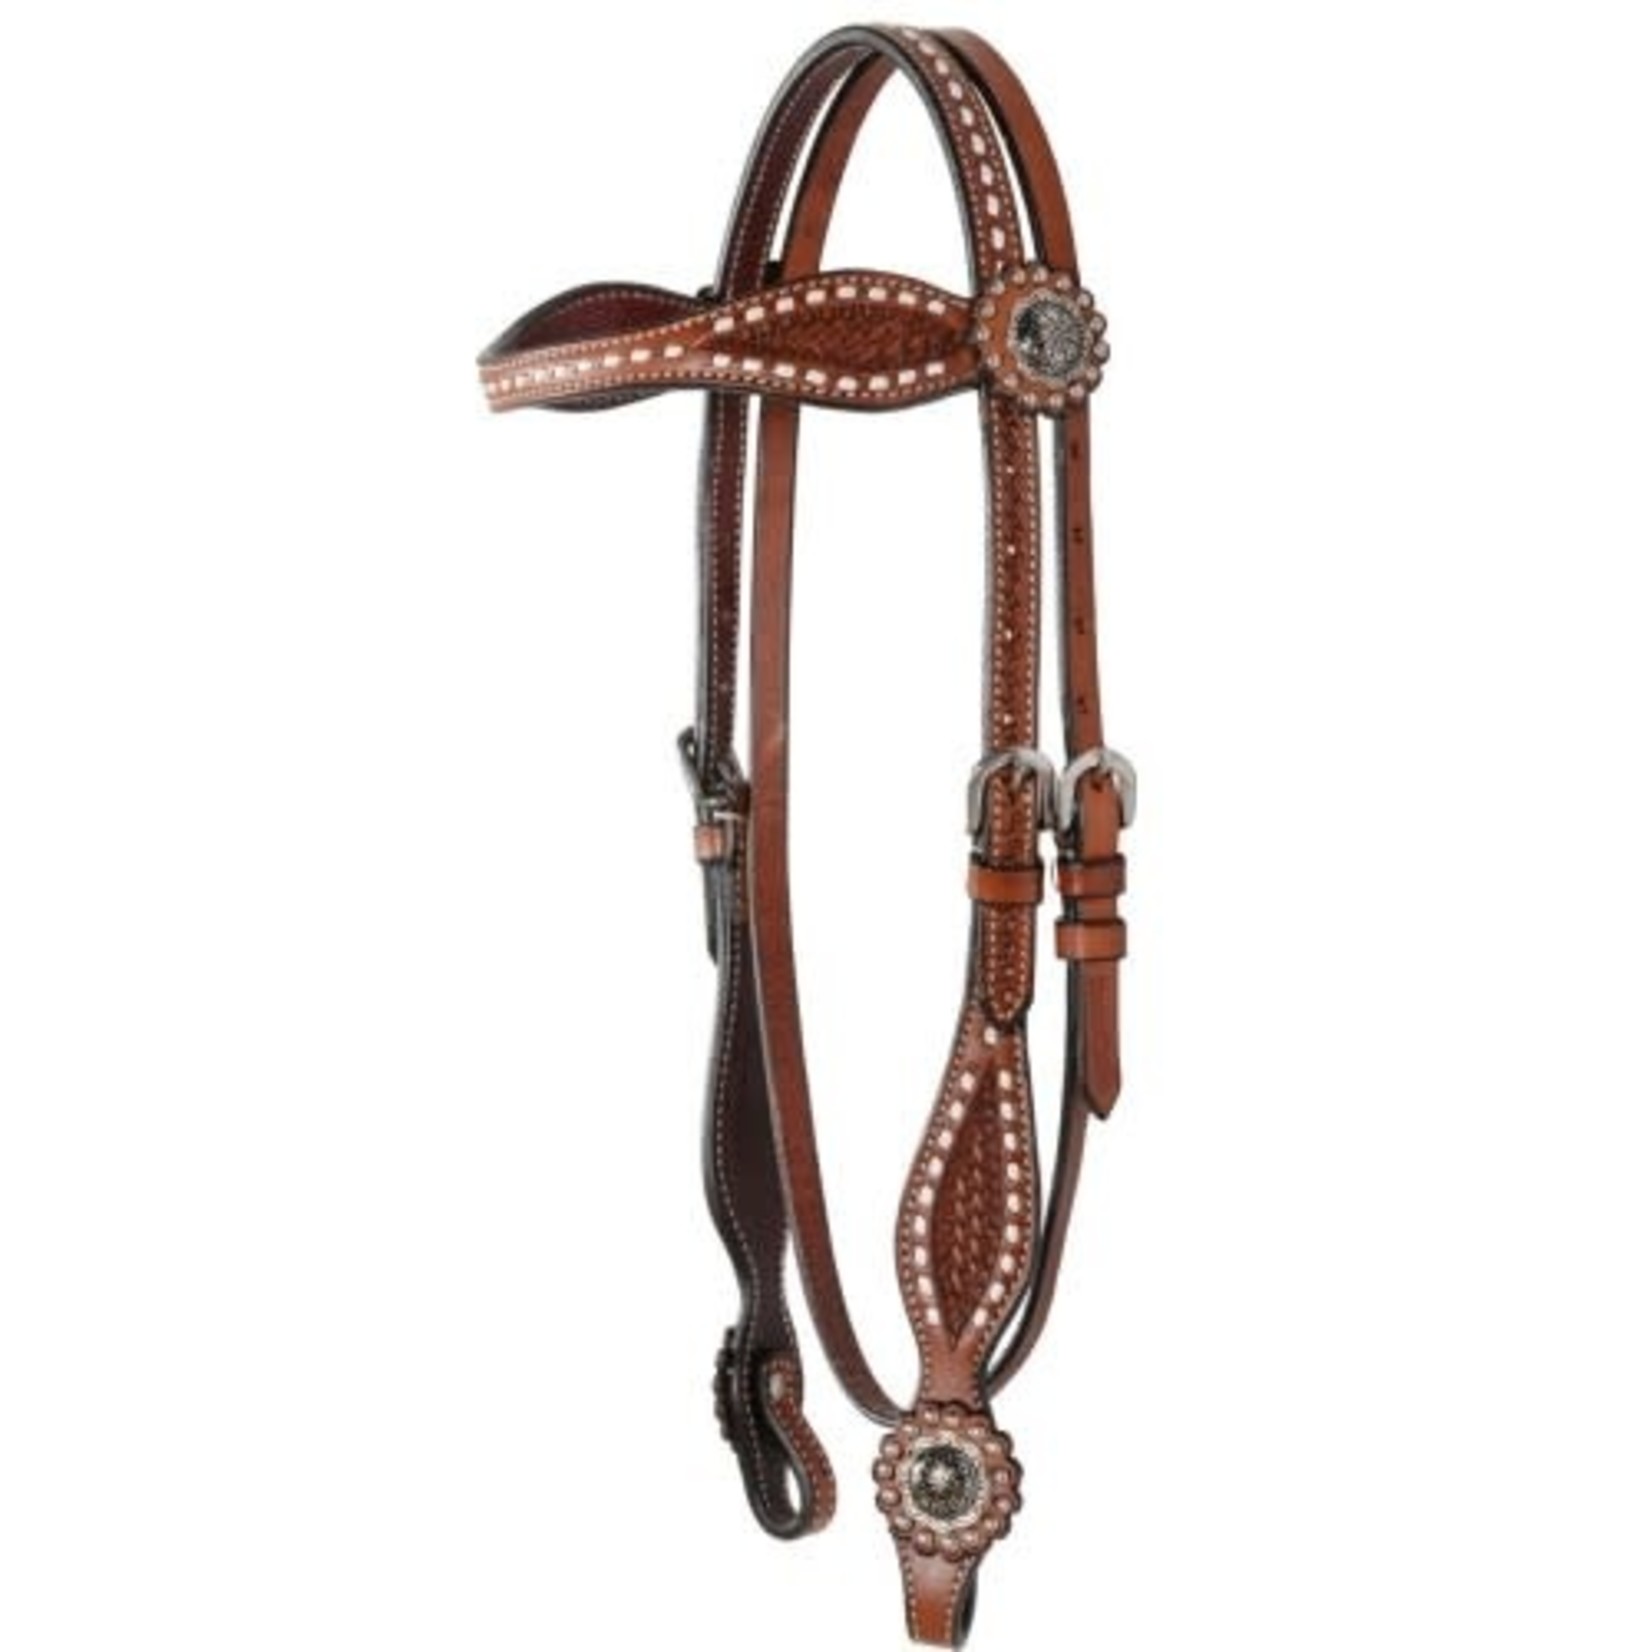 Country Legends Buckstitch & Basketweave Headstall with Breastcollar